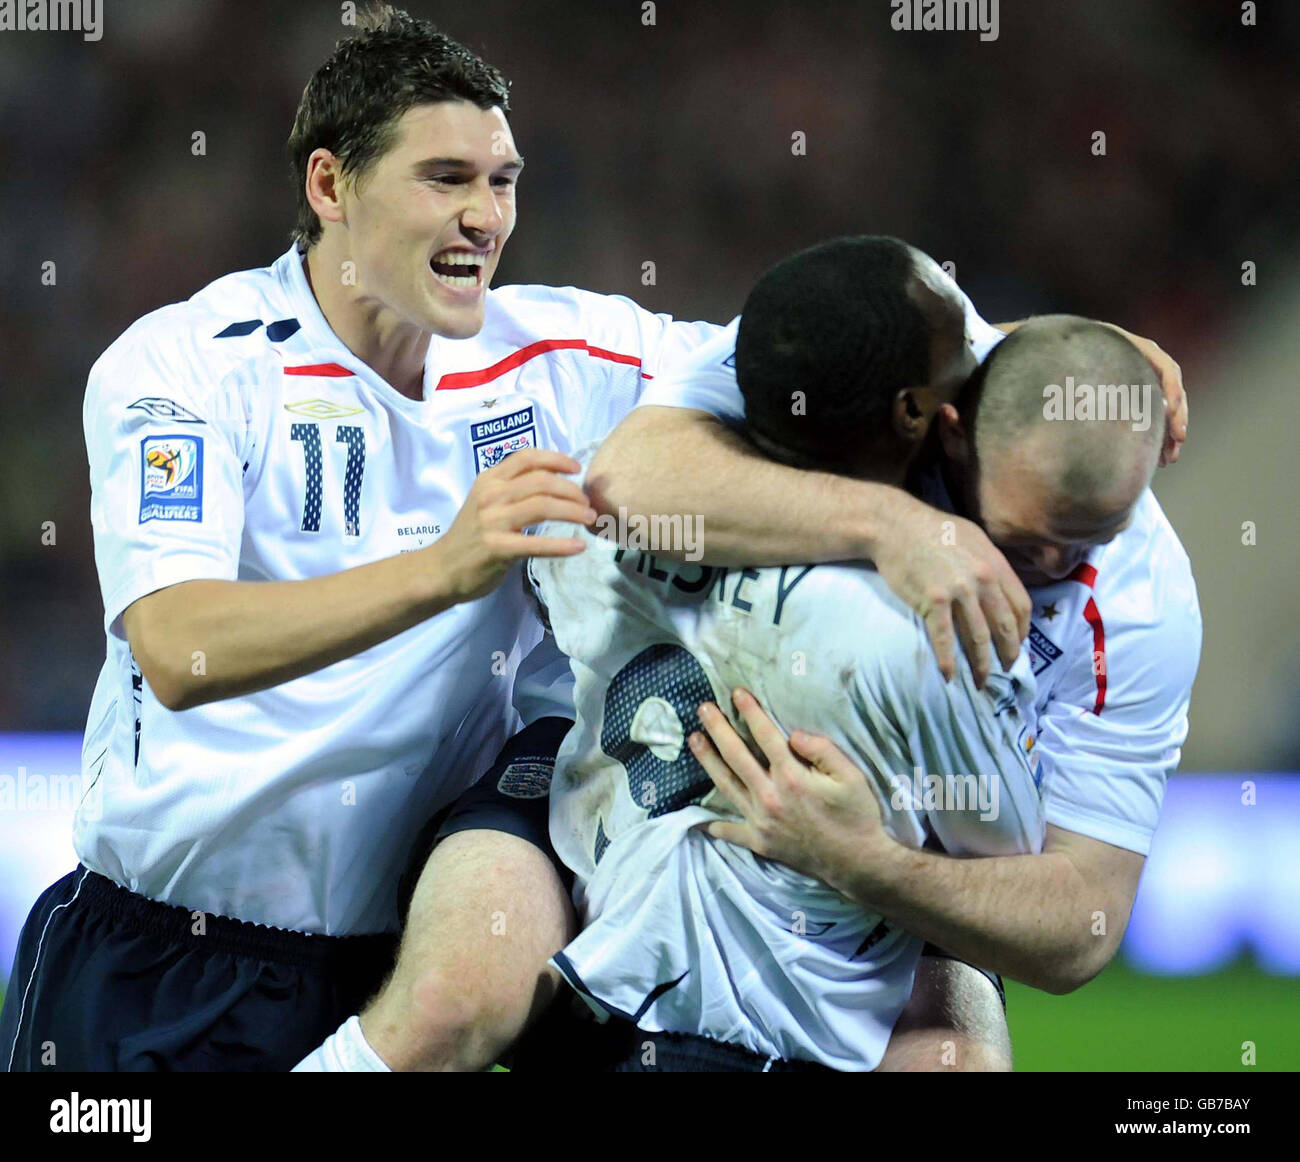 England's Wayne Rooney (right) celebrates his goal with Emile Heskey and Gareth Barry (left) during the FIFA World Cup Qualifying match at the Dinamo Stadium, Minsk, Belarus. Stock Photo